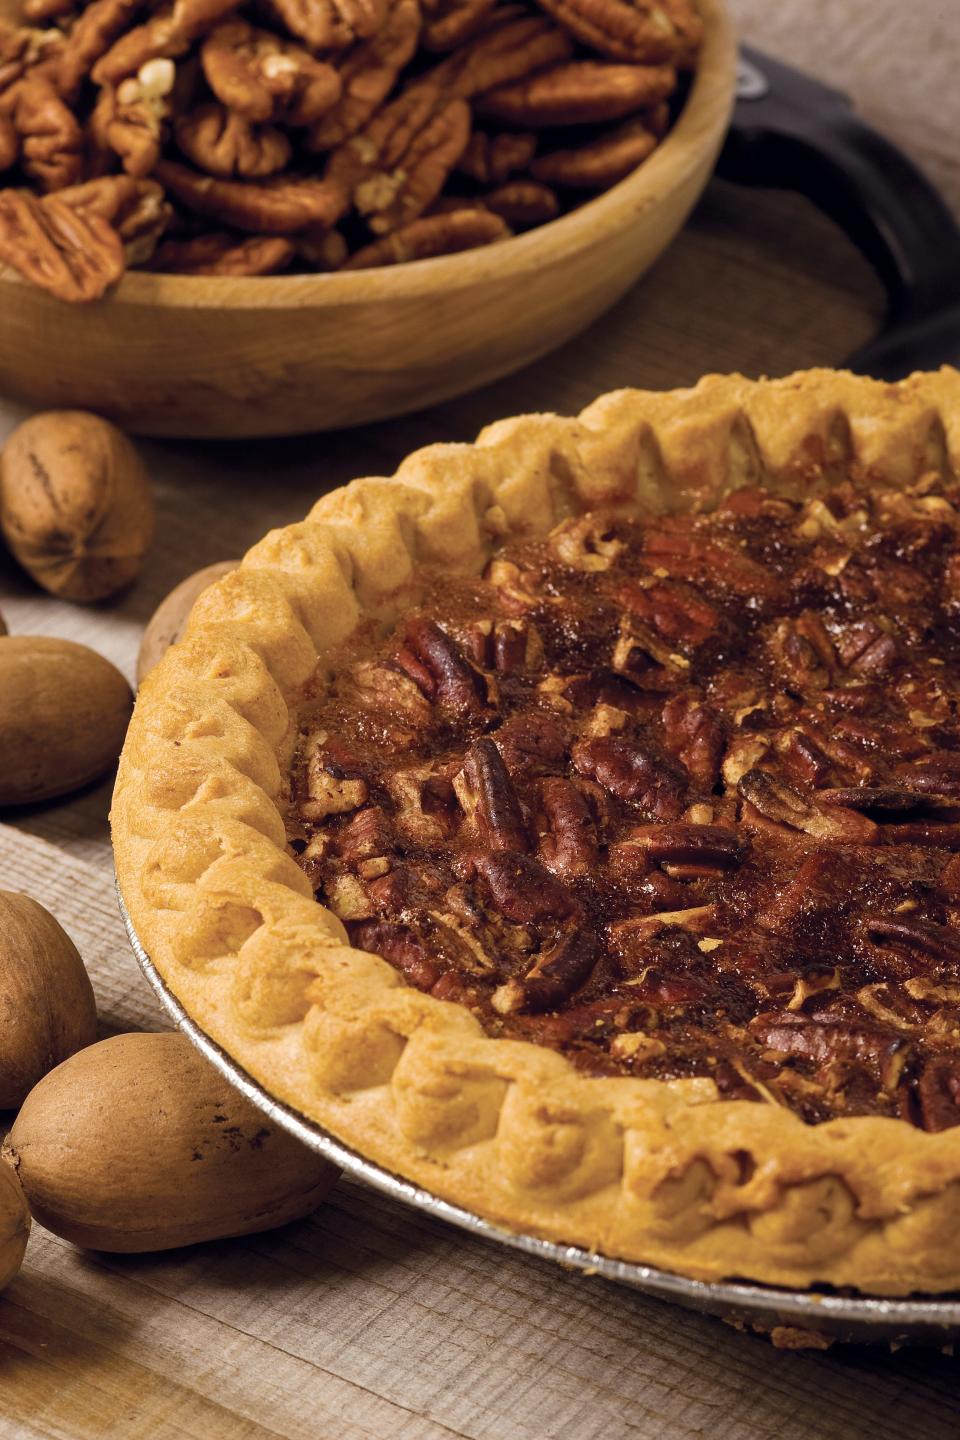 Restaurants' holiday menus include pies, such as pecan, to enjoy at the restaurant or to pick up for Thanksgiving at home.